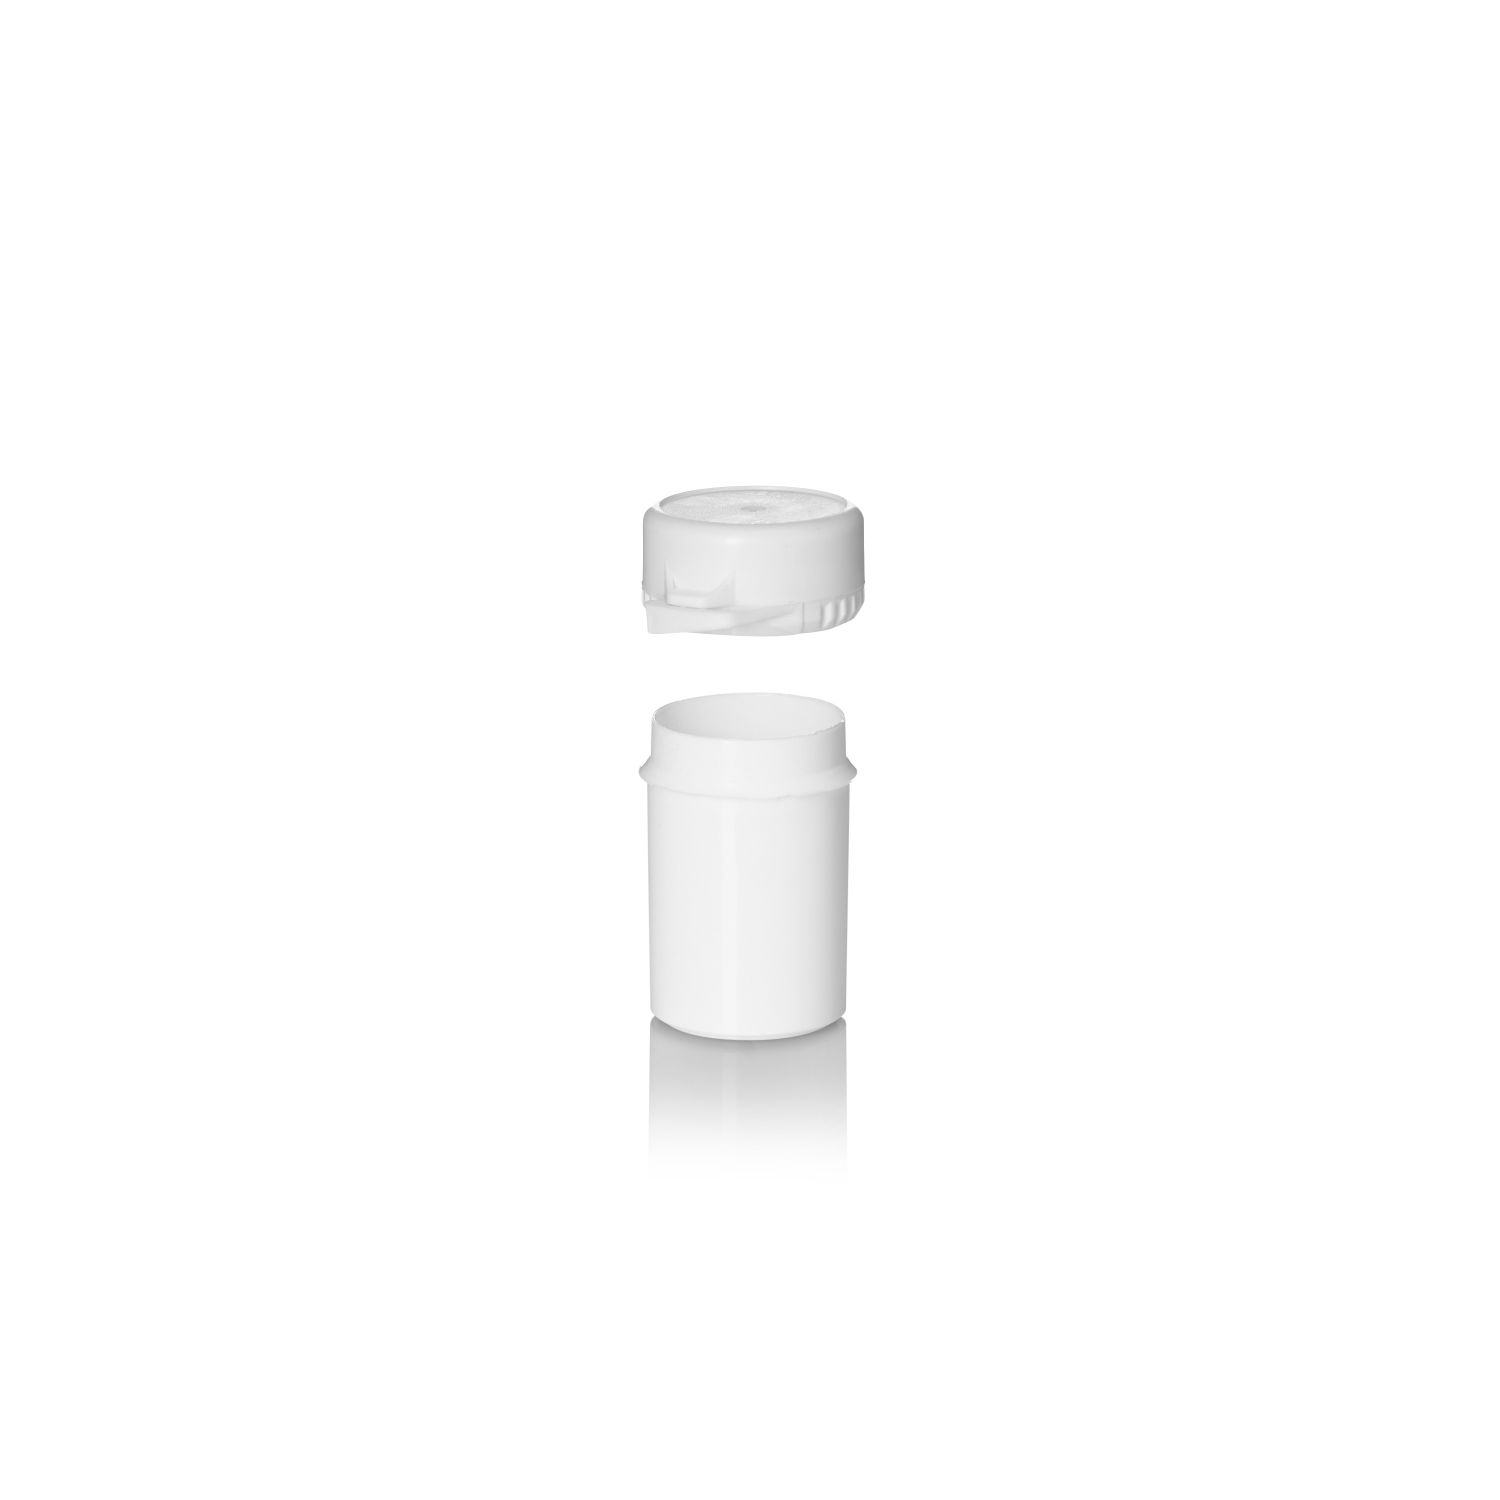 White PP Tamper Evident Lid to suit RSS20 and RSS26